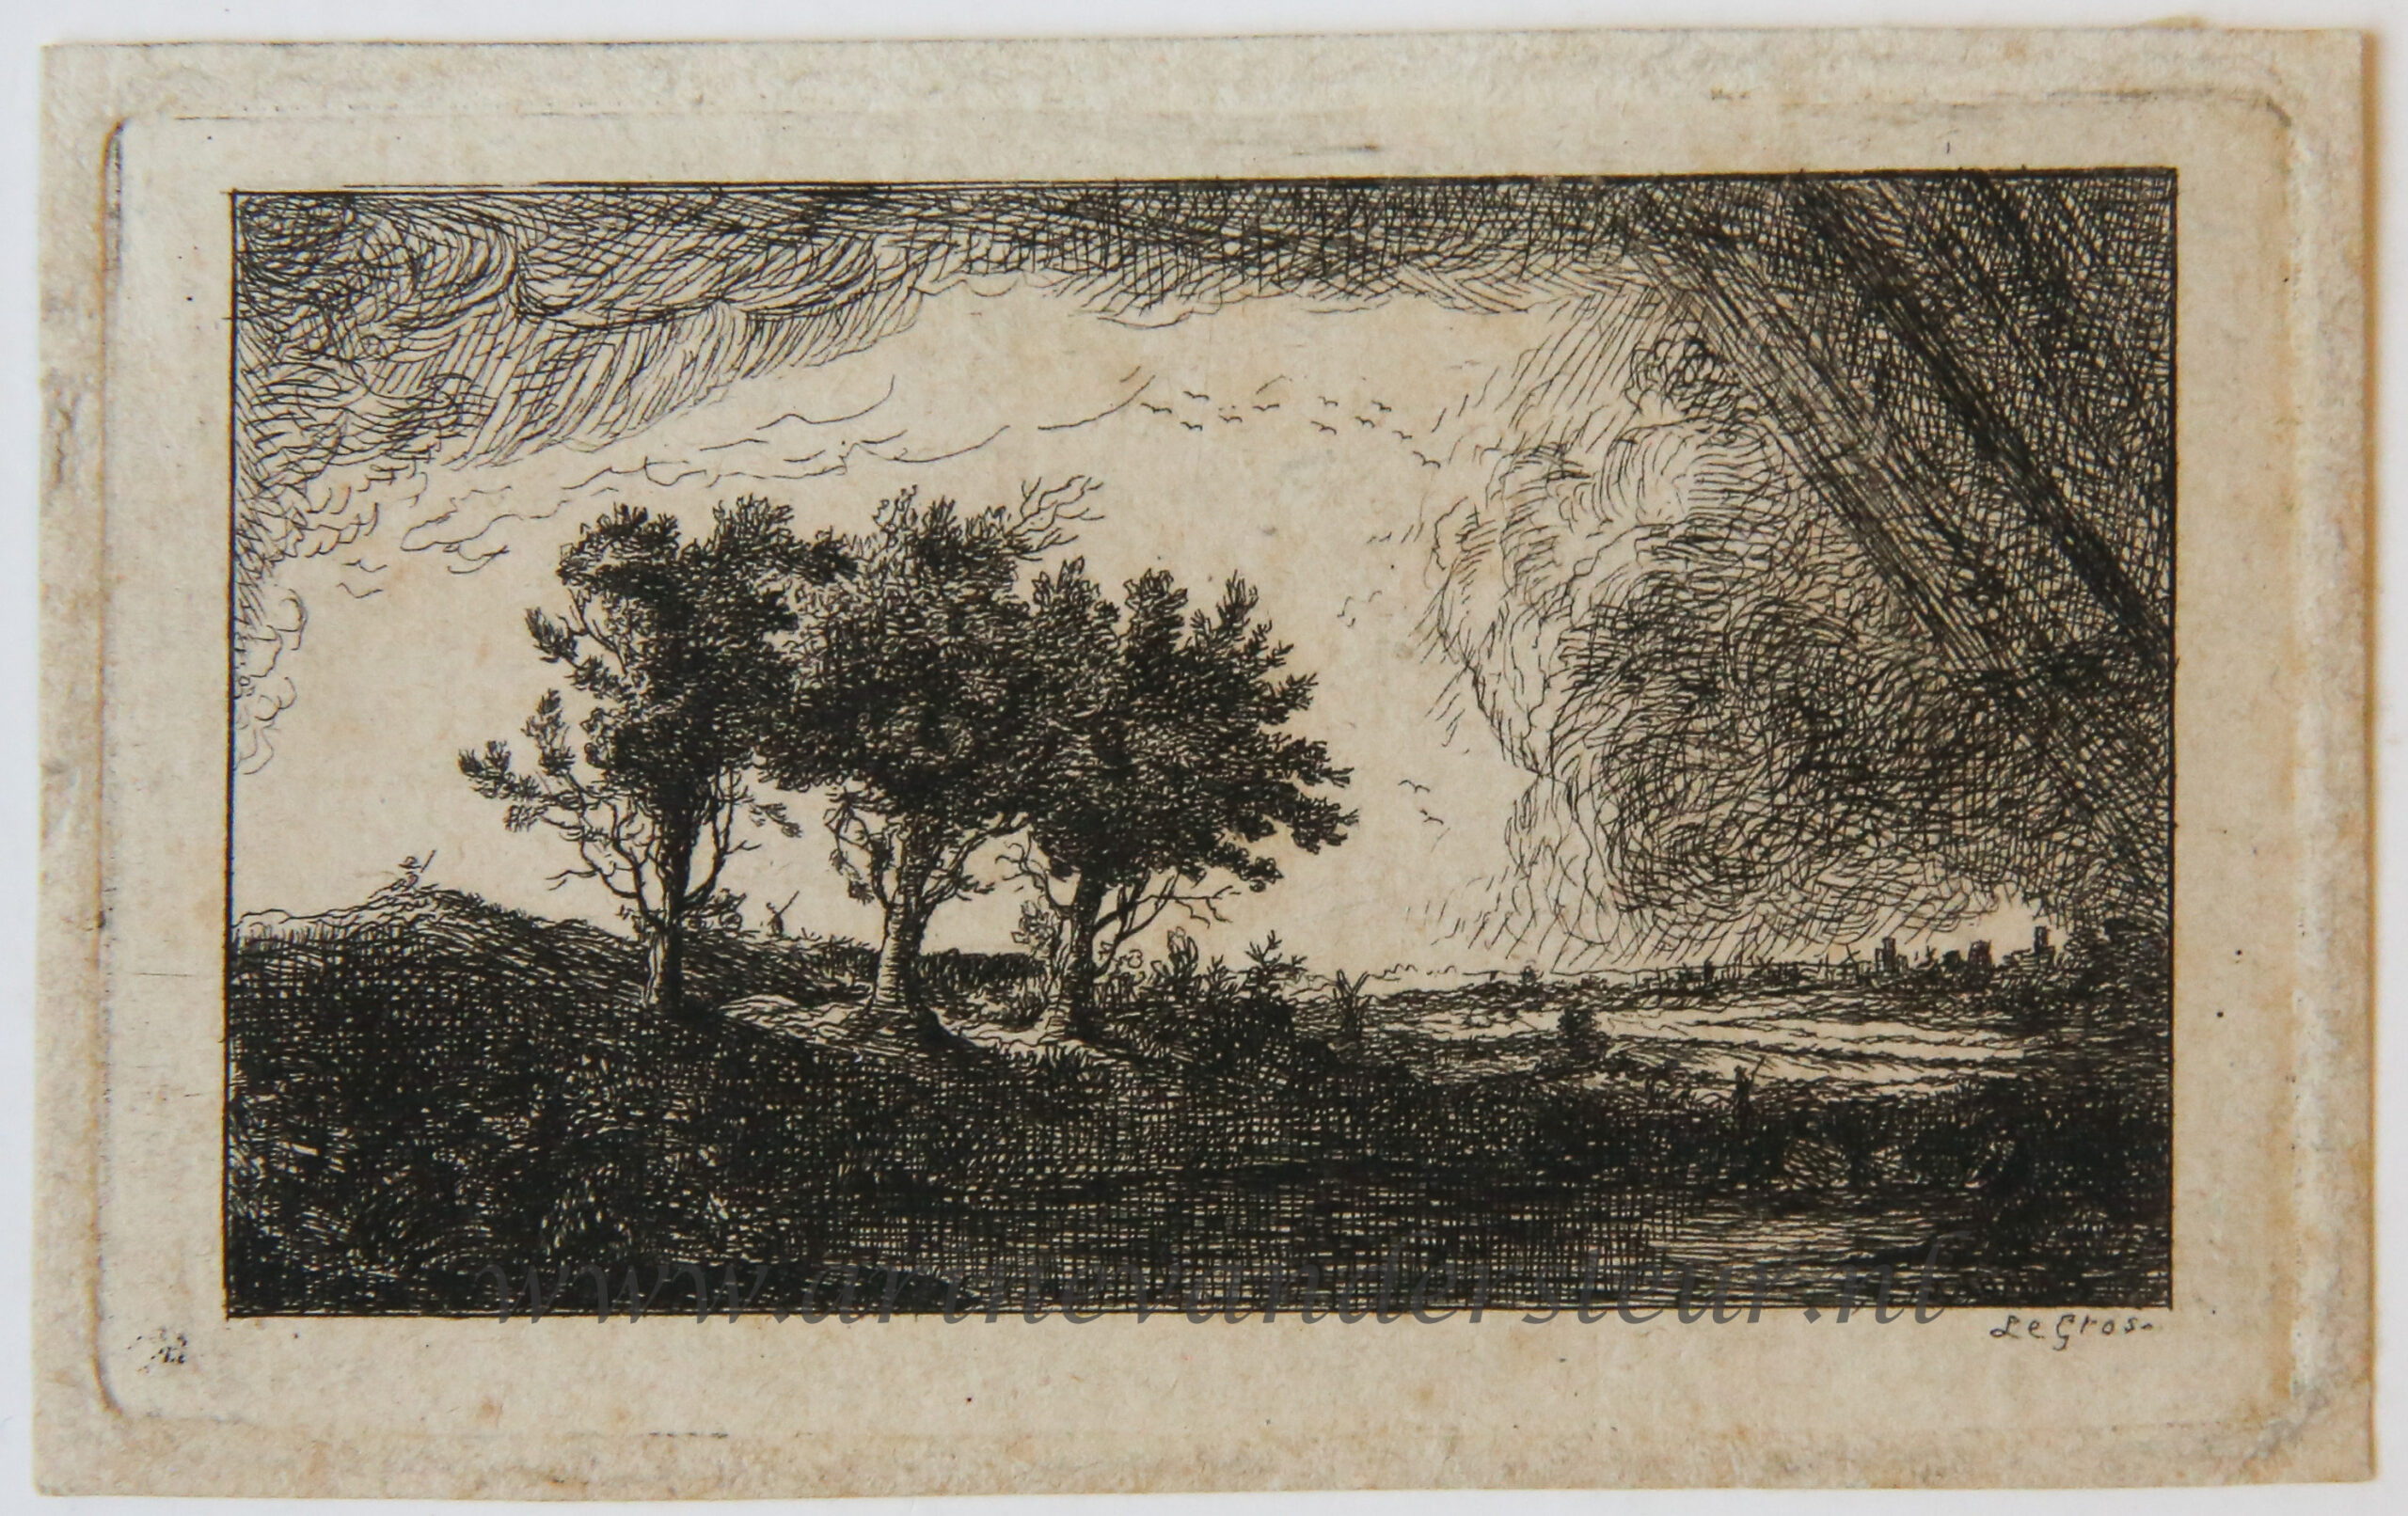 [Miniature antique print, etching] Salvator Legros, after Rembrandt, The three trees, published ca. 1788.